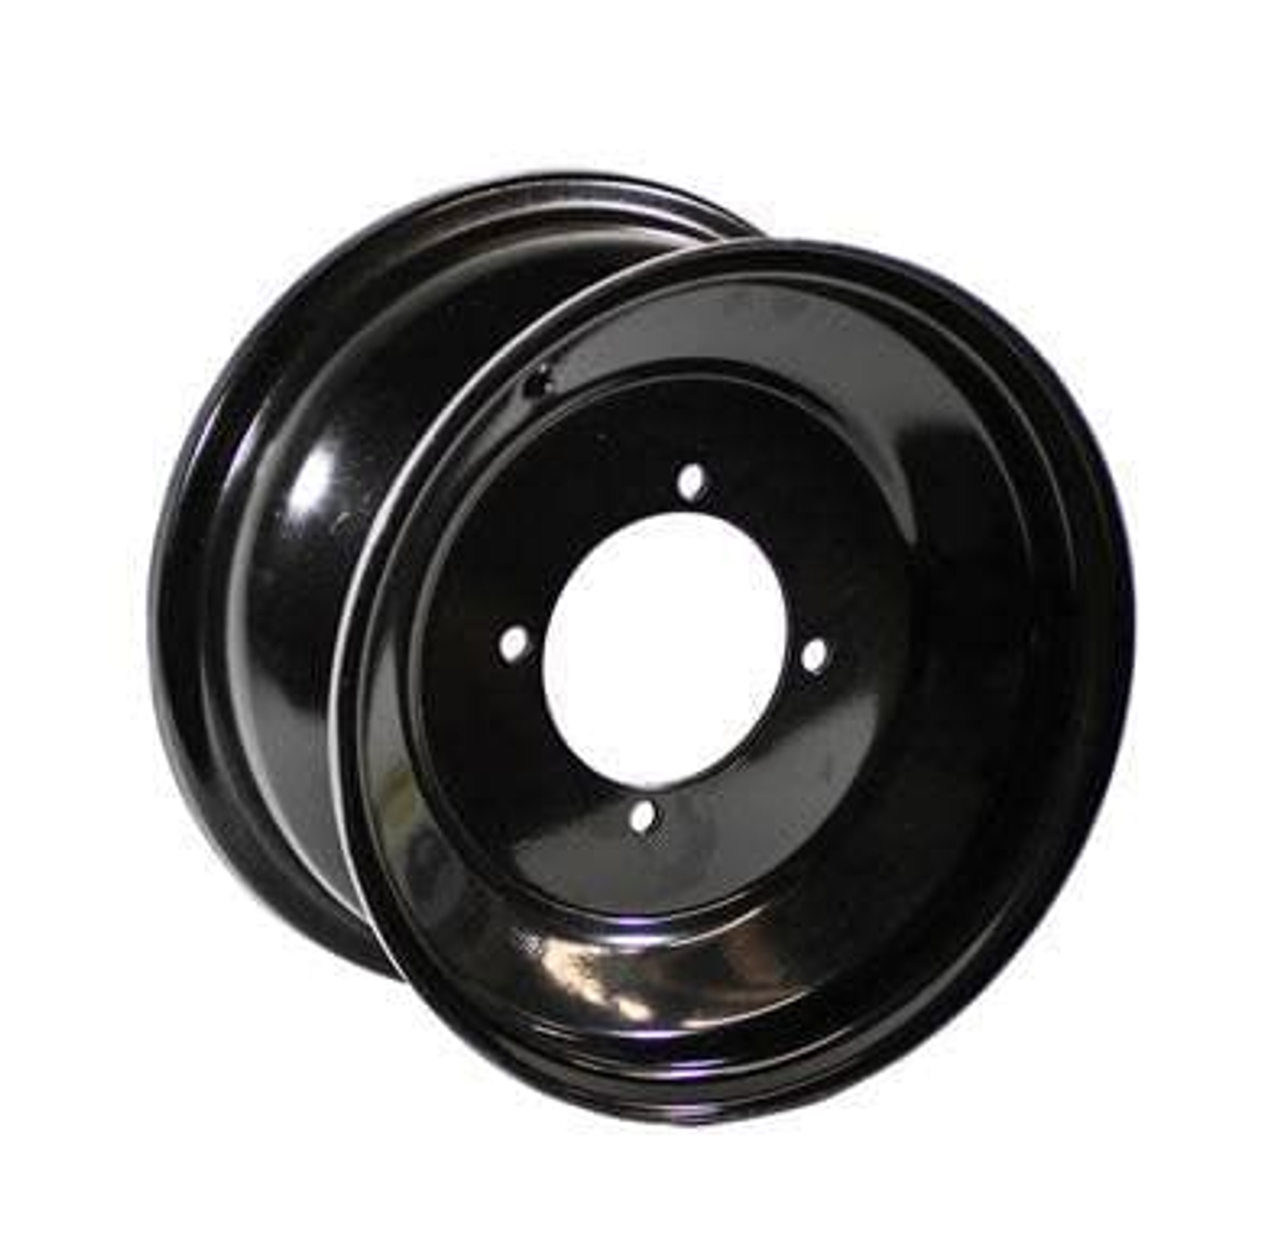 Aftermarket Kayo Bull or Storm 150 180 Front Rim Wheel